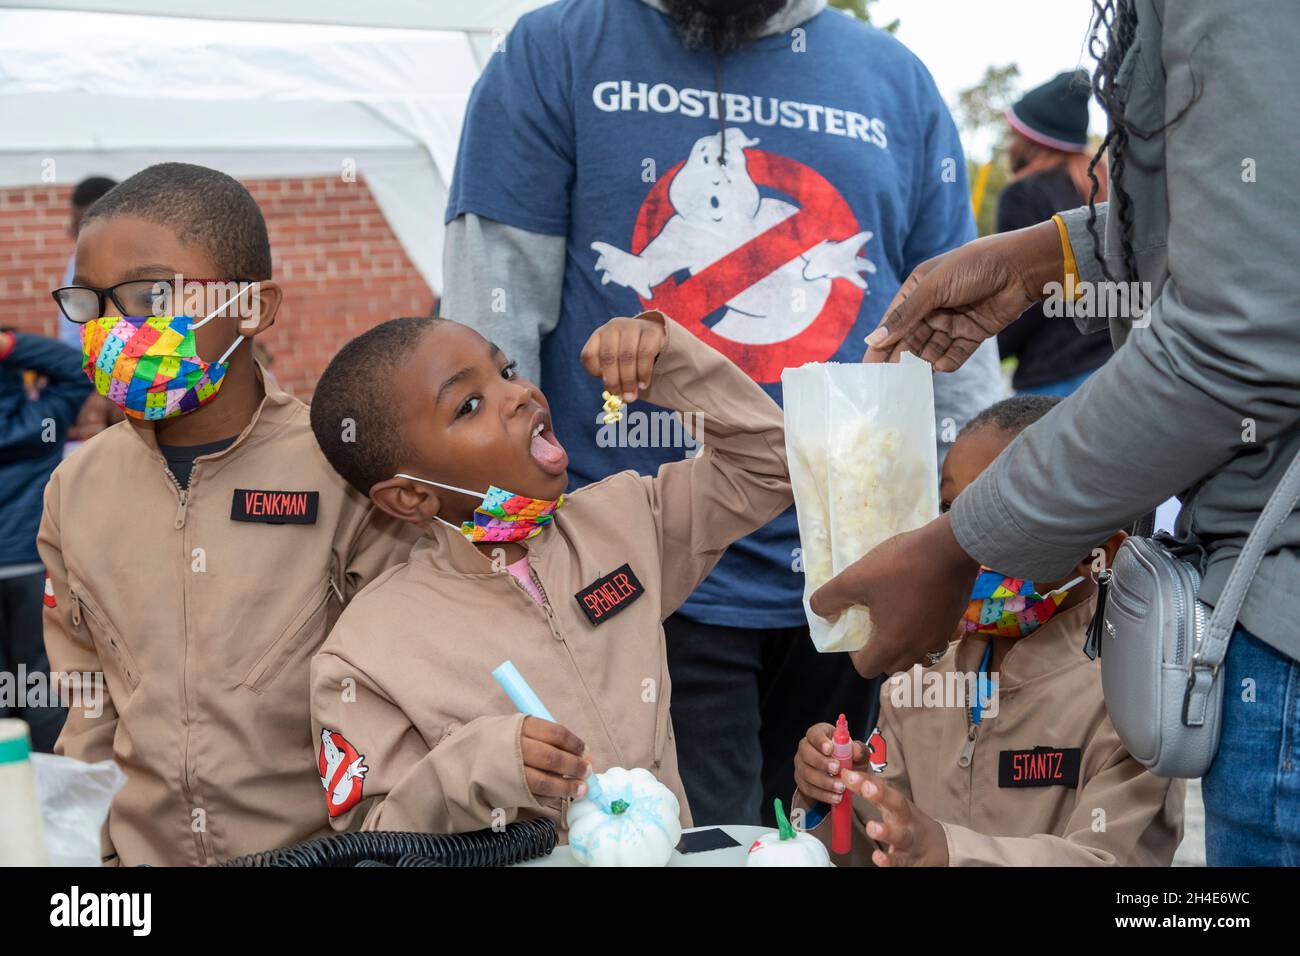 Detroit, Michigan - A boy in a Ghostbusters costume eats popcorn at Alger in the Alley, a neighborhood Halloween festival in the alley behind the Alge Stock Photo